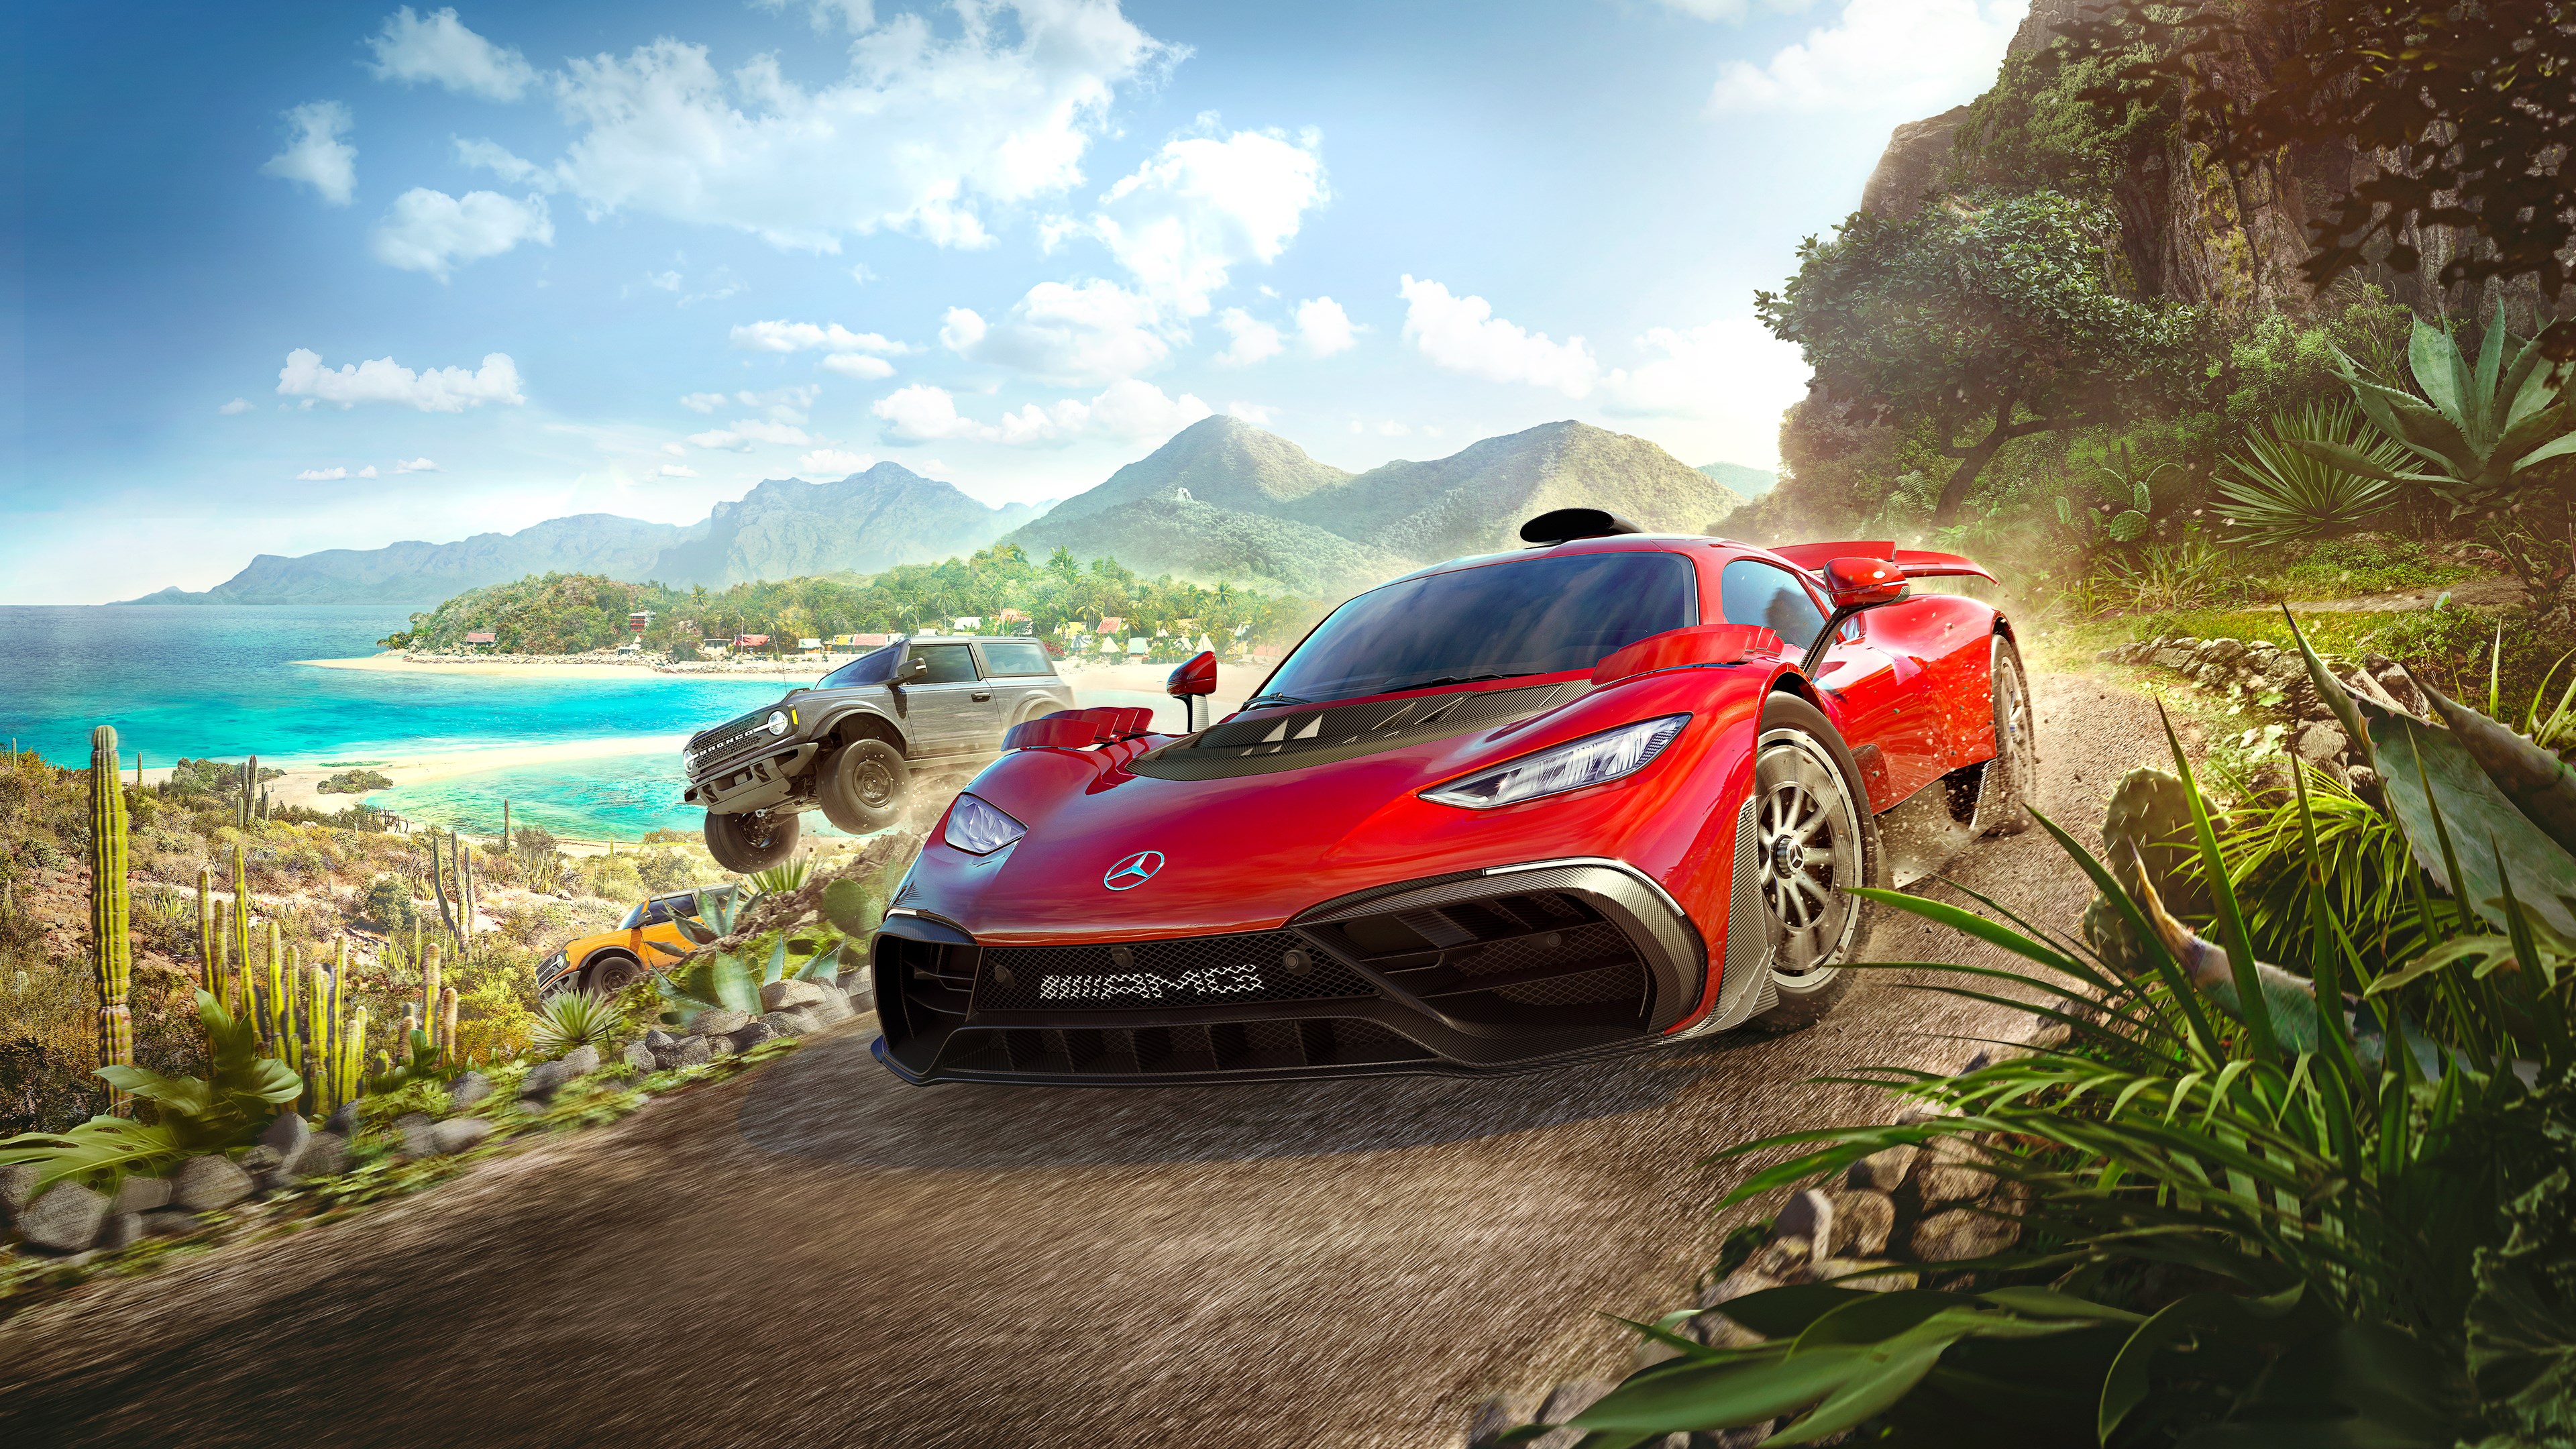 Video For Forza Horizon 5 Premium Edition Is Now Available For PC, Xbox One, And Xbox Series X|S